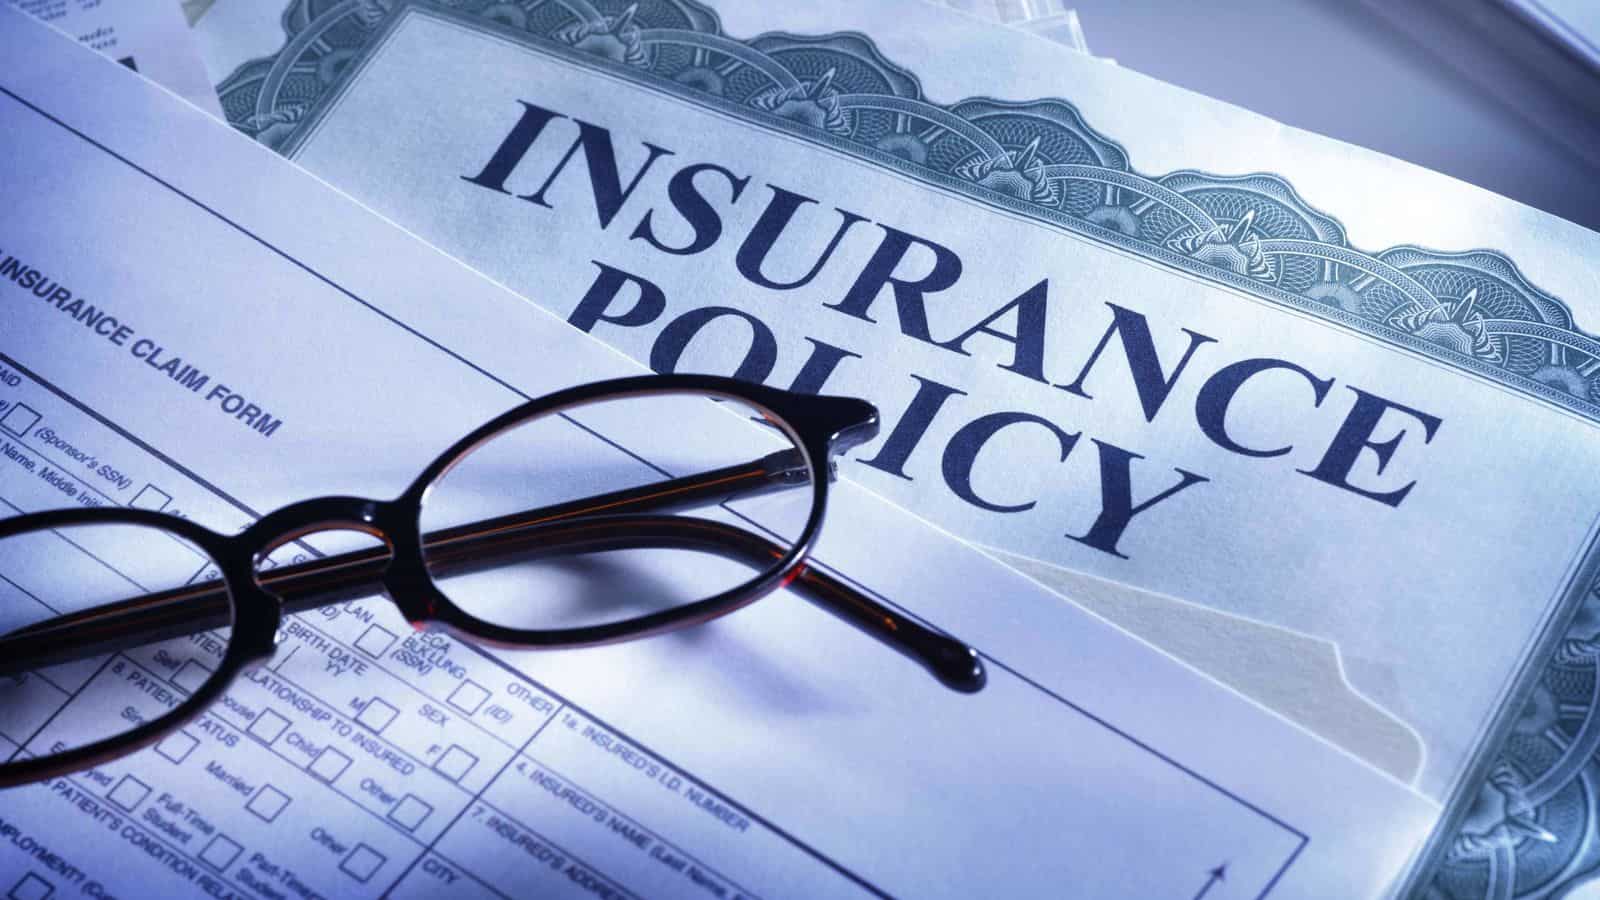 Life insurance: Surrender value payment equals 65 percent of new business